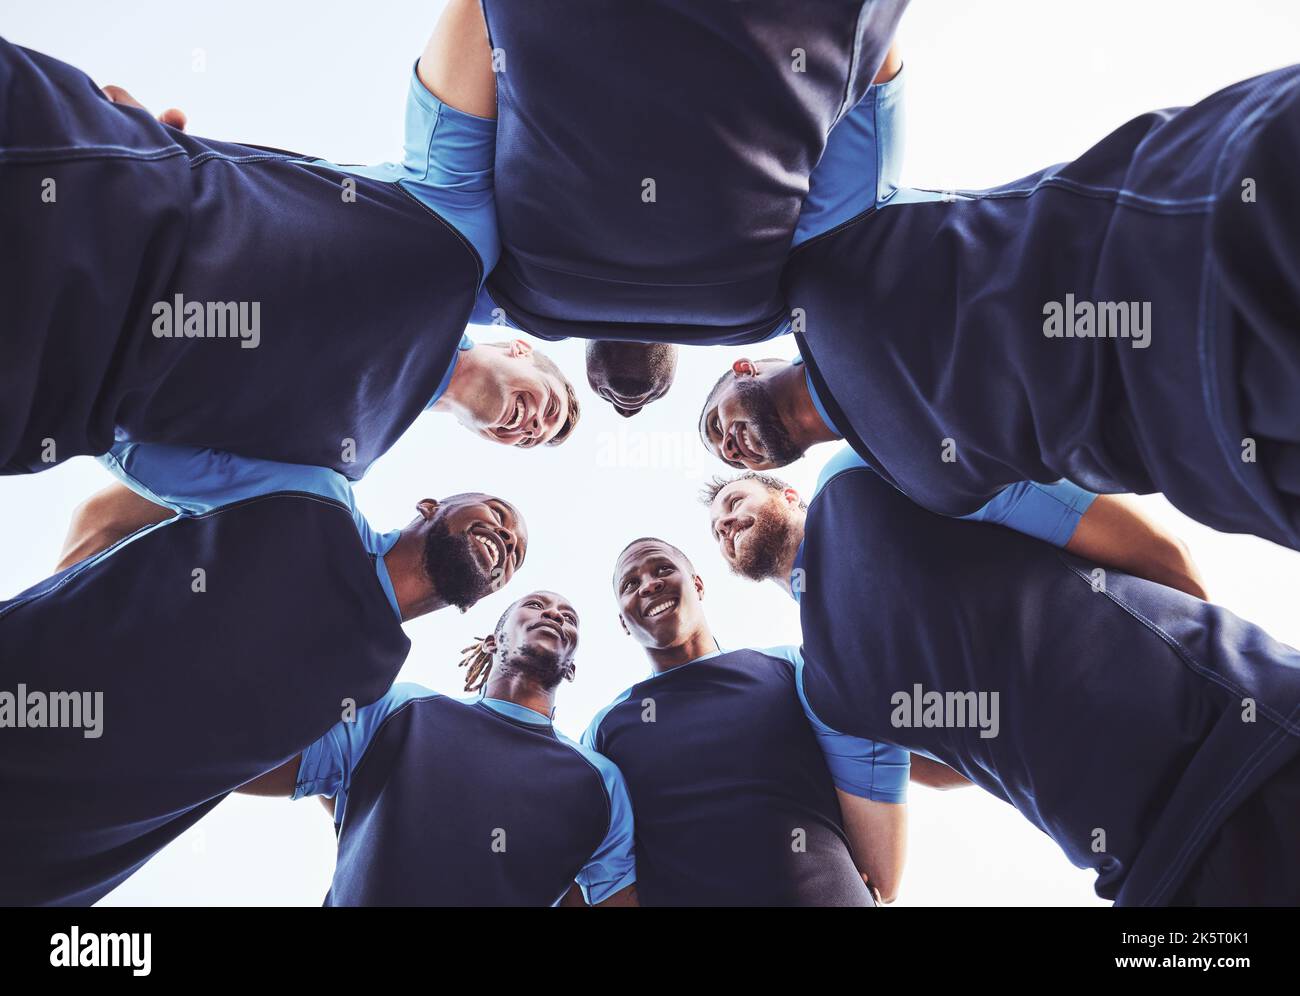 Below diverse group of rugby players standing in a huddle together outside on a field. Young male athletes looking serious and focused while huddled Stock Photo